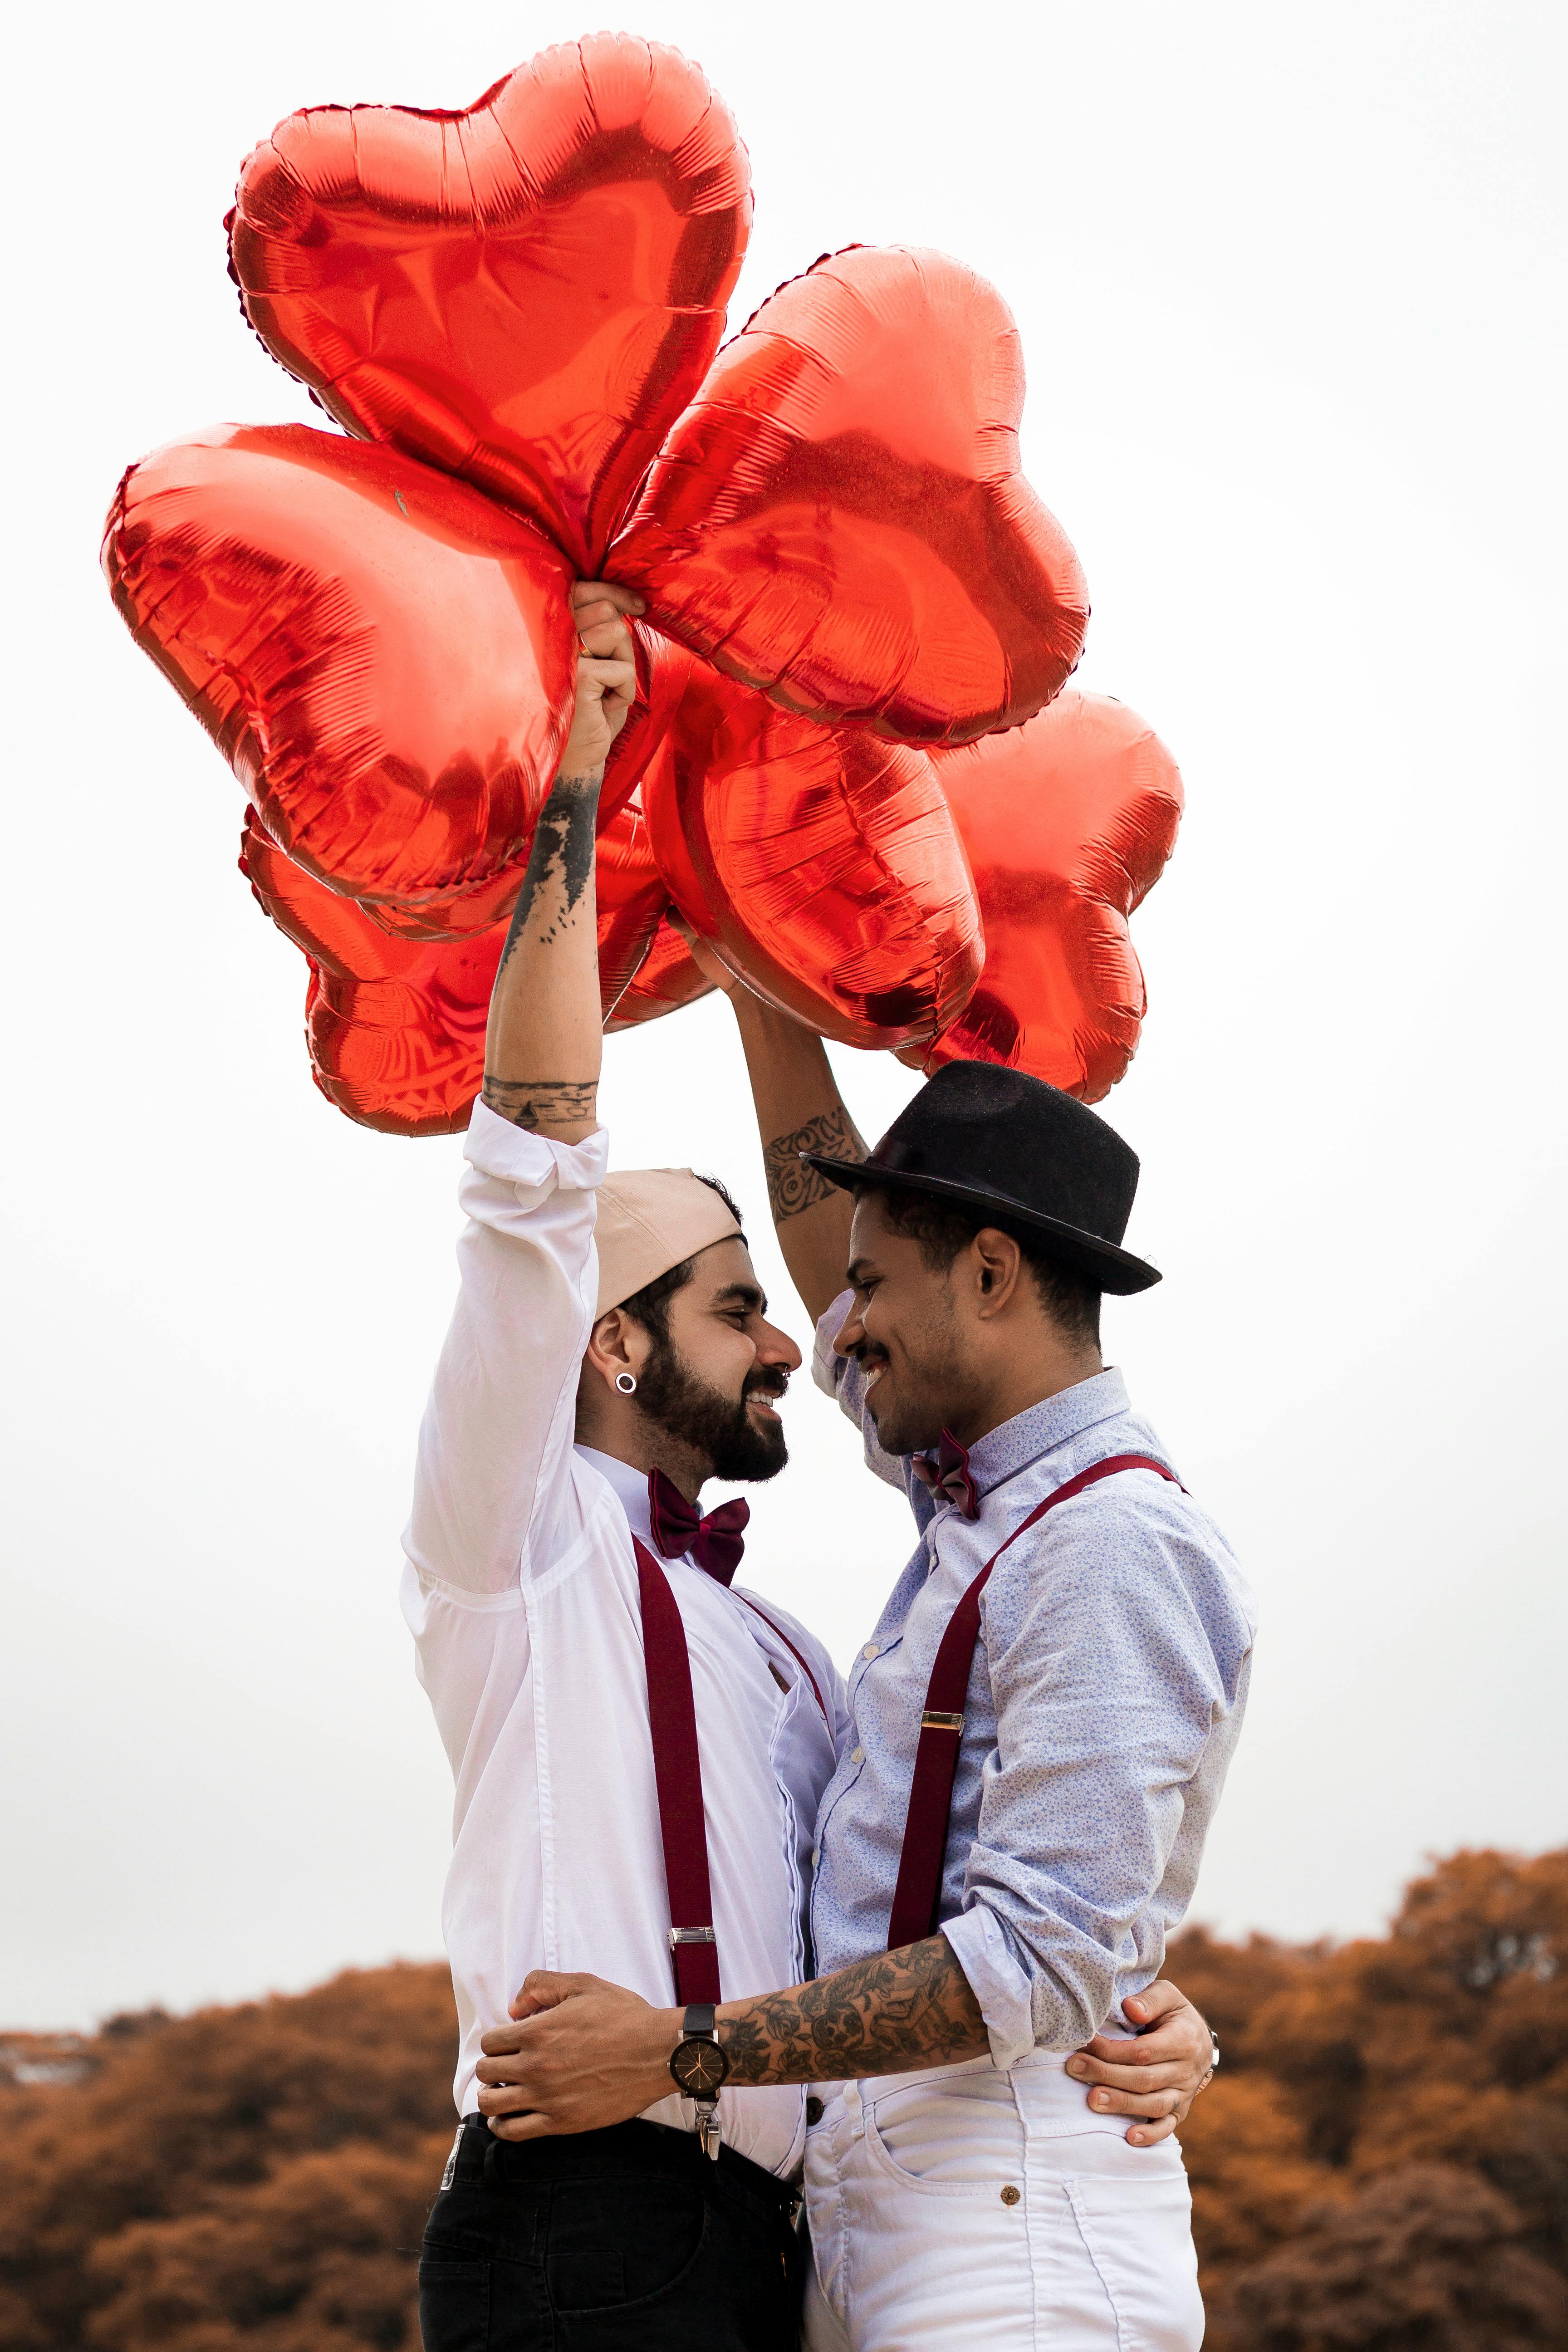 Two men smiling and embracing while holding up heart-shaped balloons | Source: Pexels